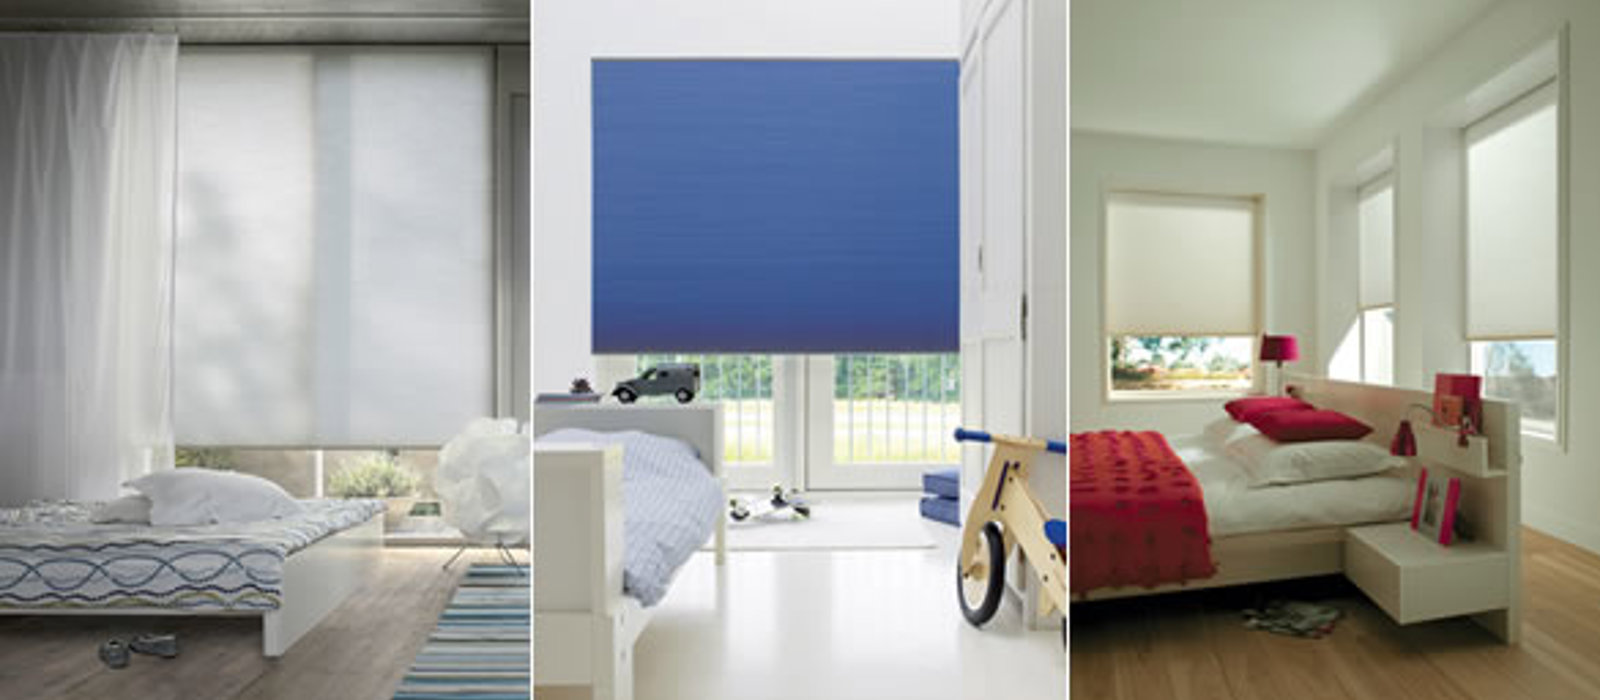 Duette energy saving blinds for heat reduction